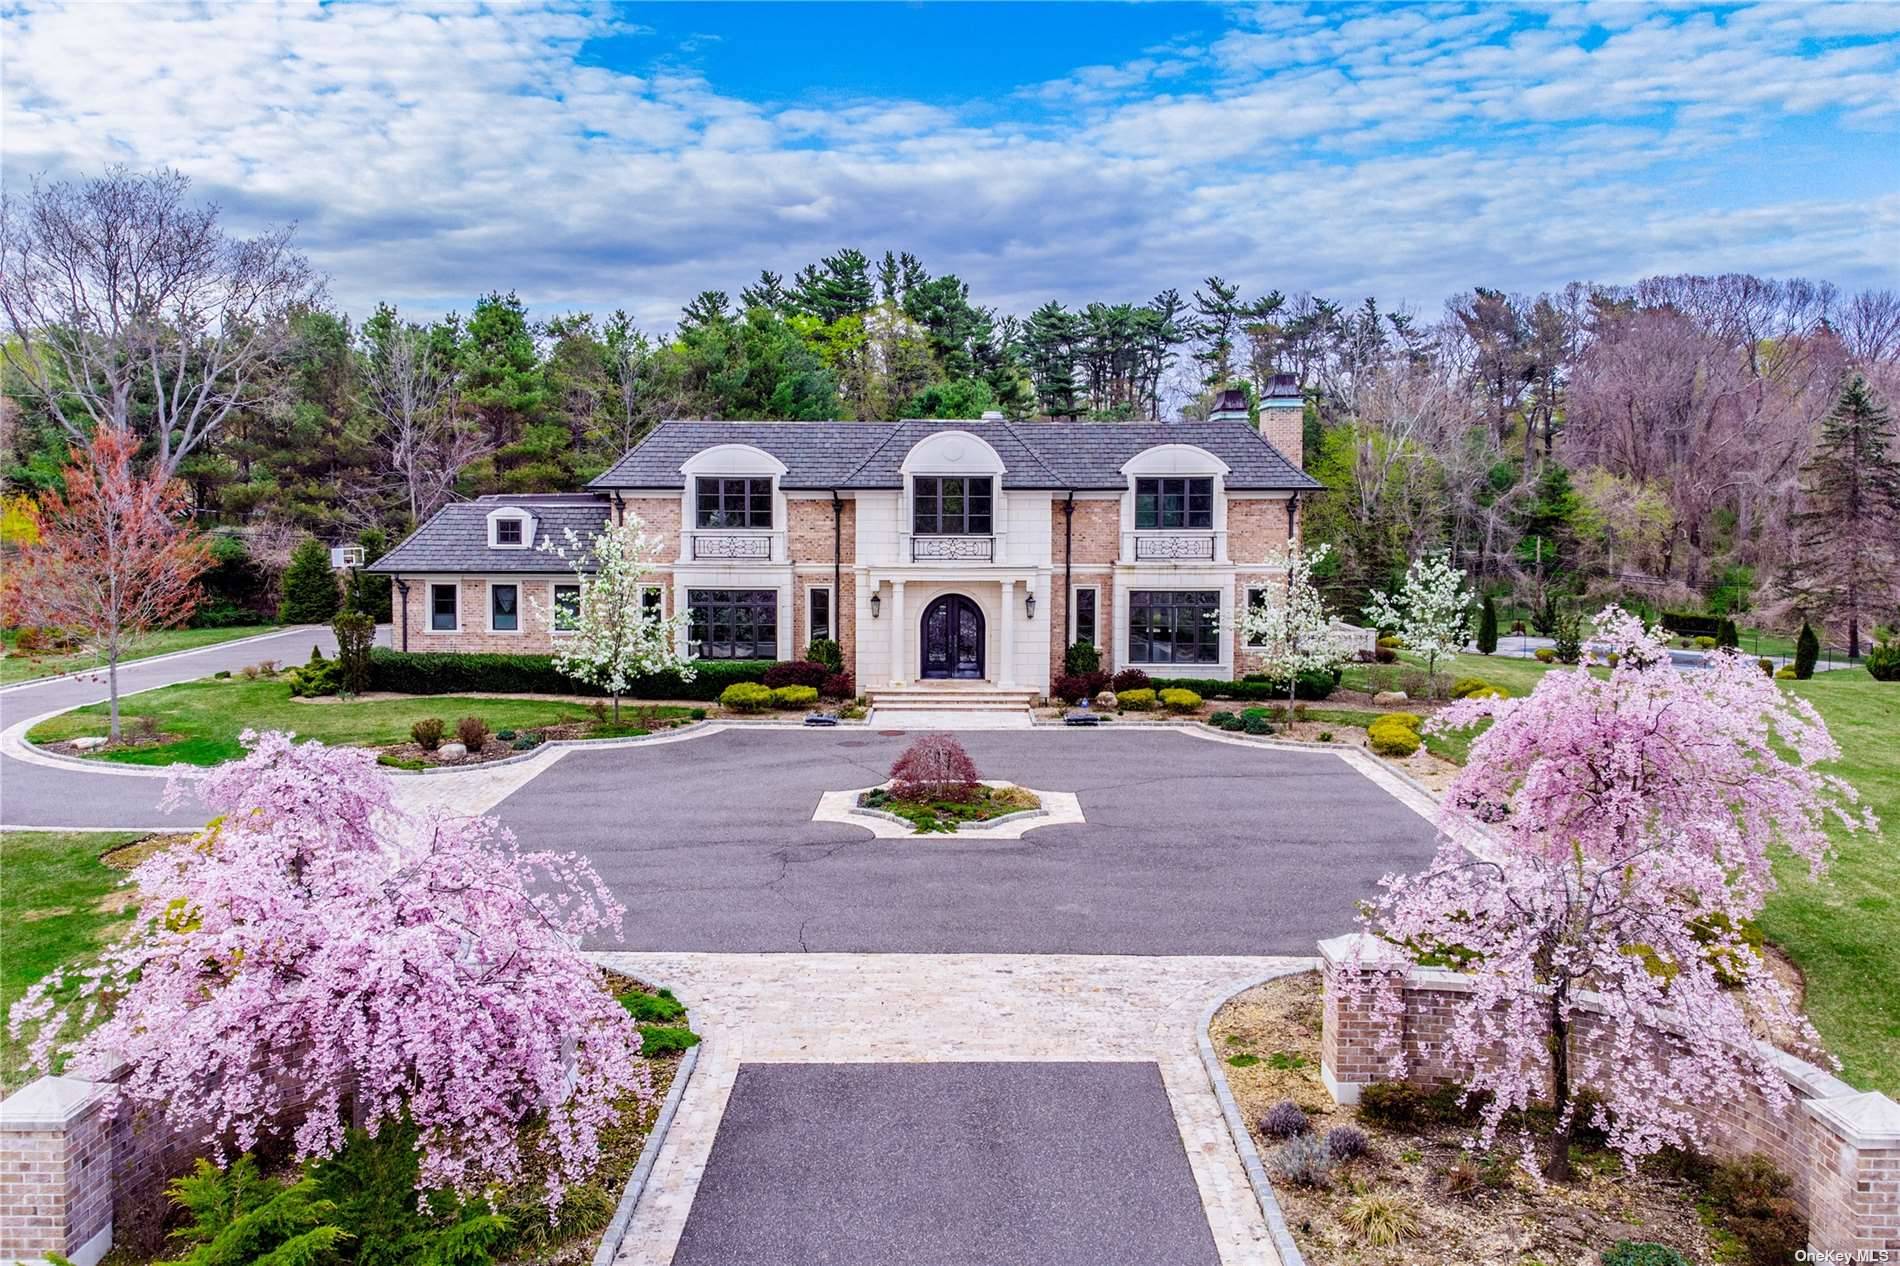 Masonry Colonial Built in 2015 in Old Westbury, A Well known Community, With an Open Terrain.